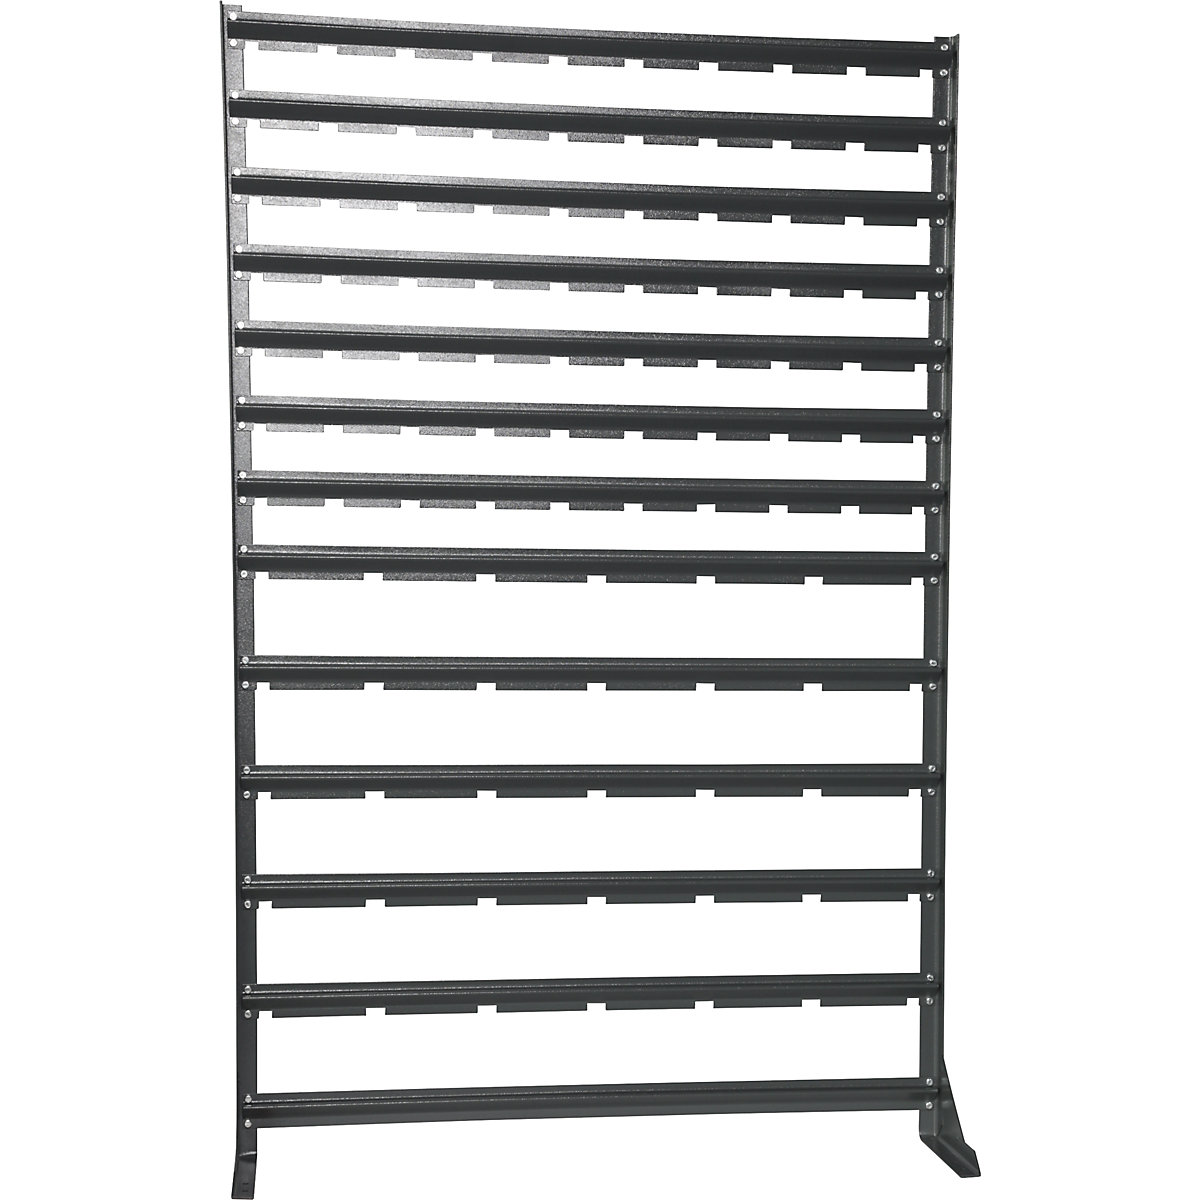 Small parts shelf unit, width 1020 mm, without open fronted storage bins, HxD 1580 x 235 mm-6